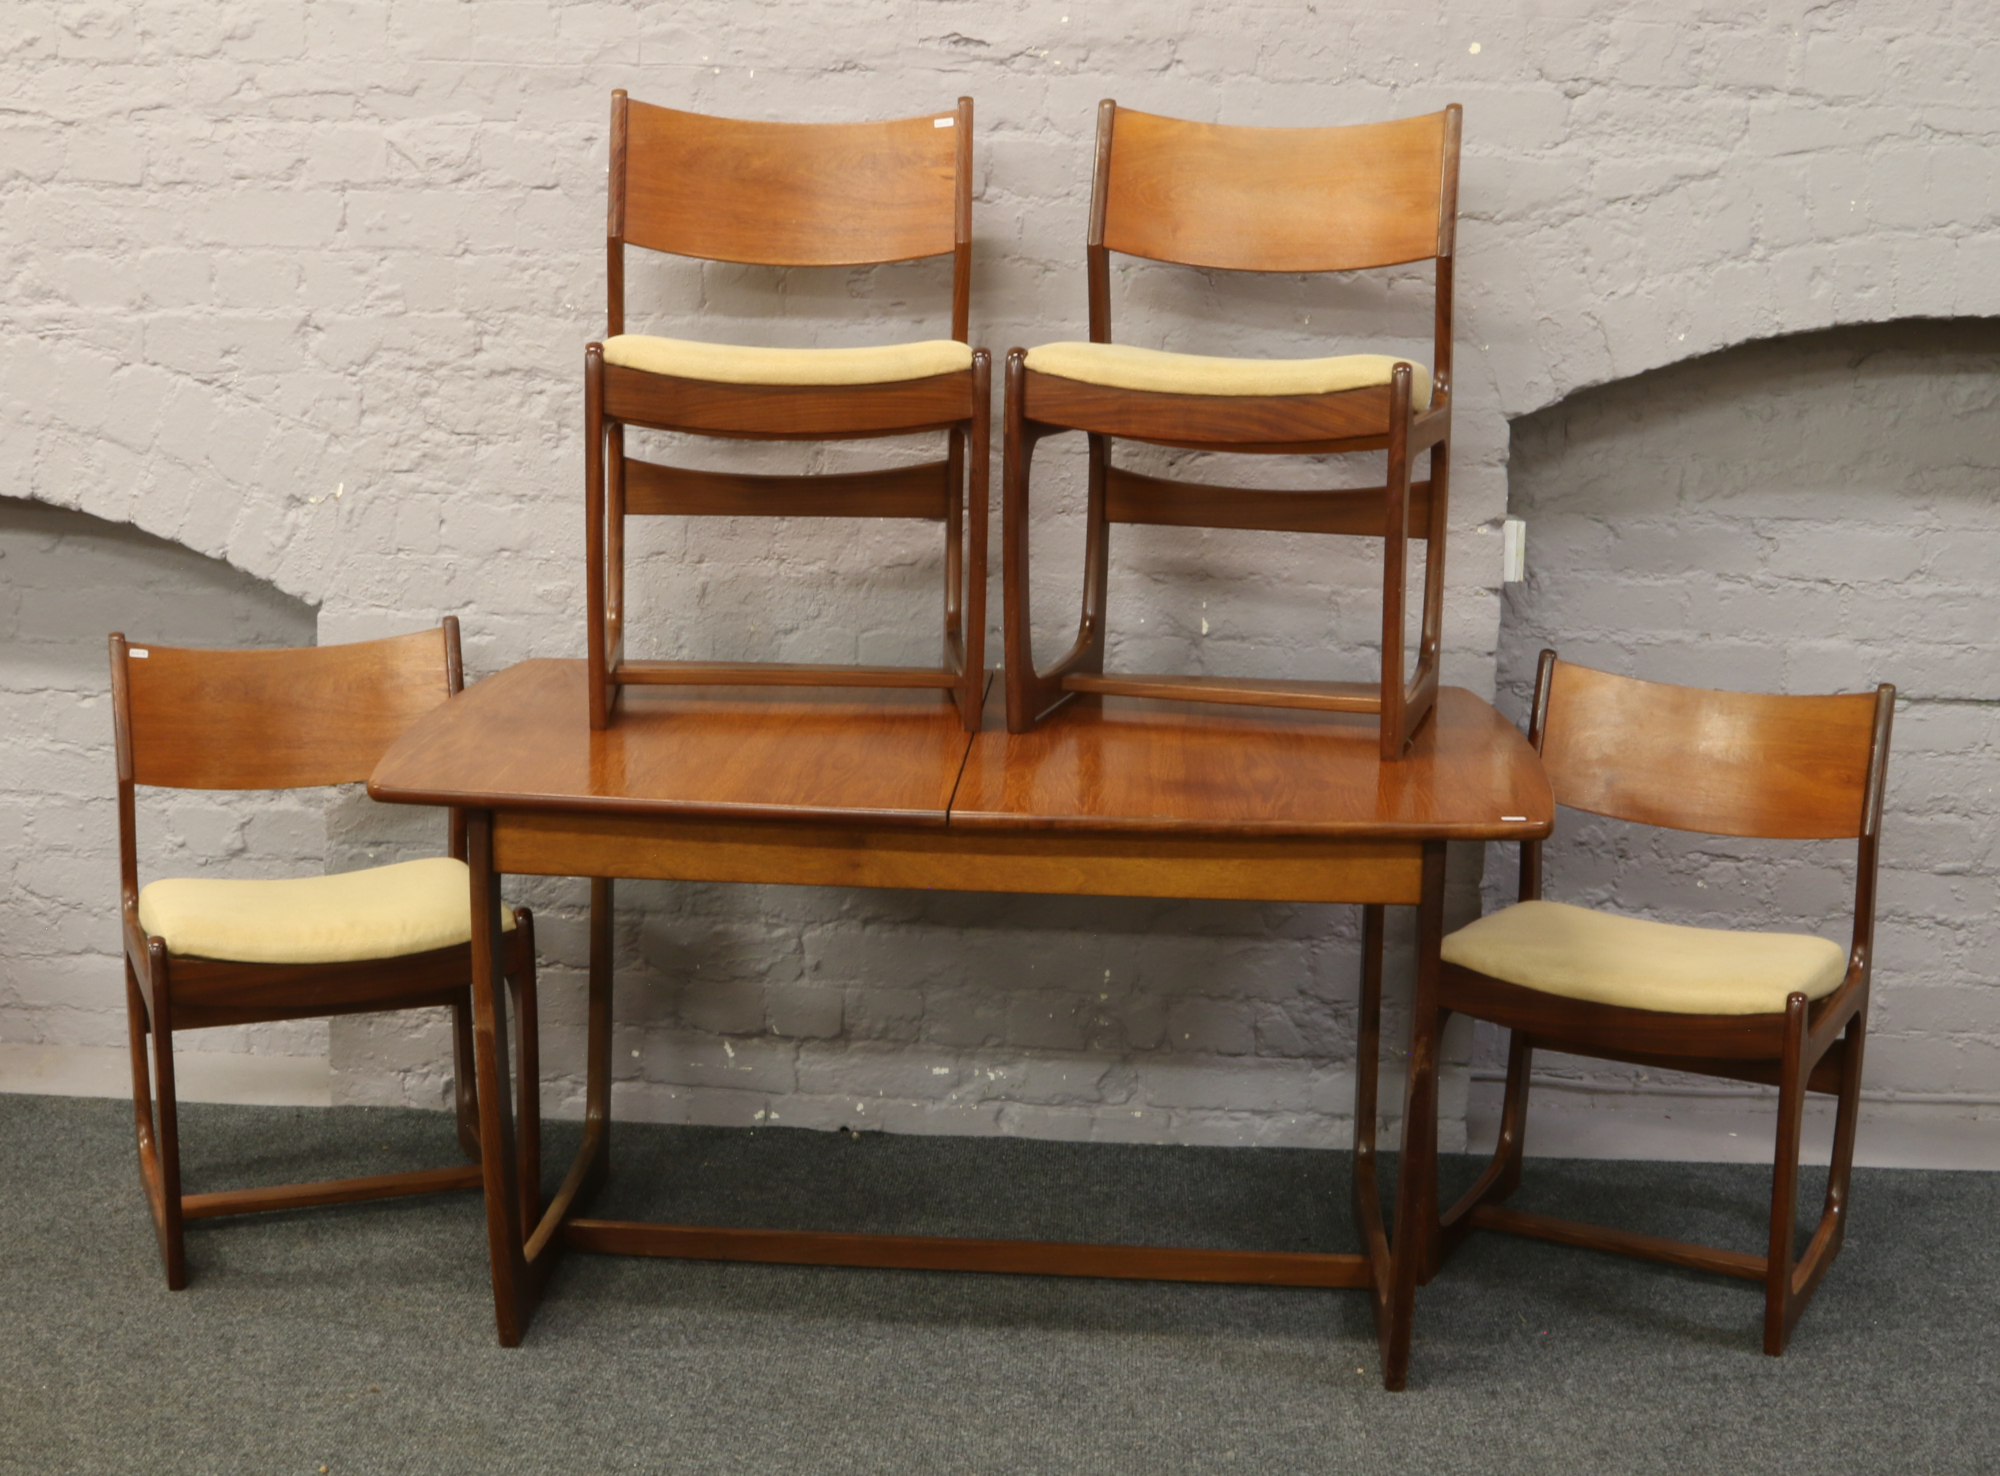 A G plan style teak extending dining table, 181 x 88cm along with four matching dining chairs.